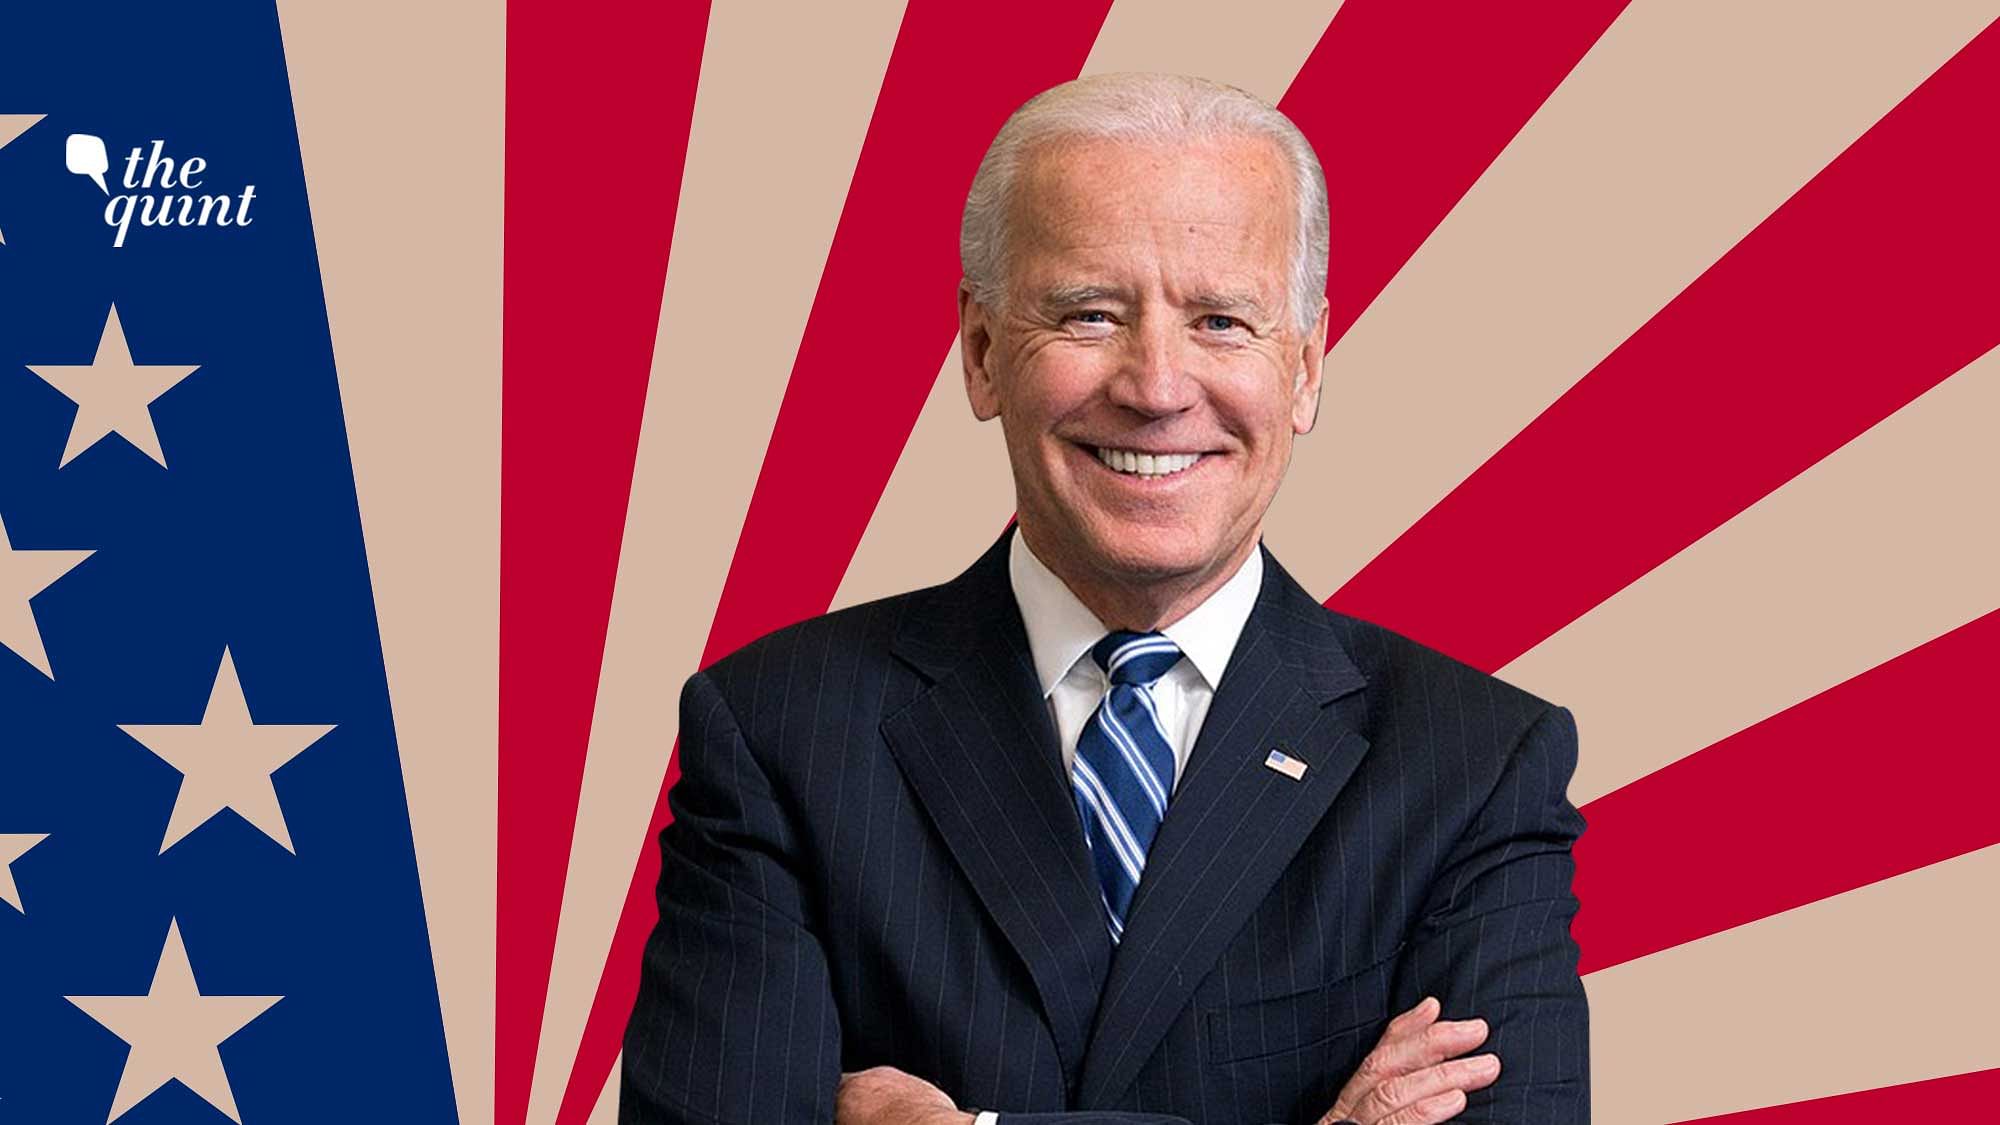 Many US networks called the race in favour of Biden, projecting a victory for him in the key state of Pennsylvania.